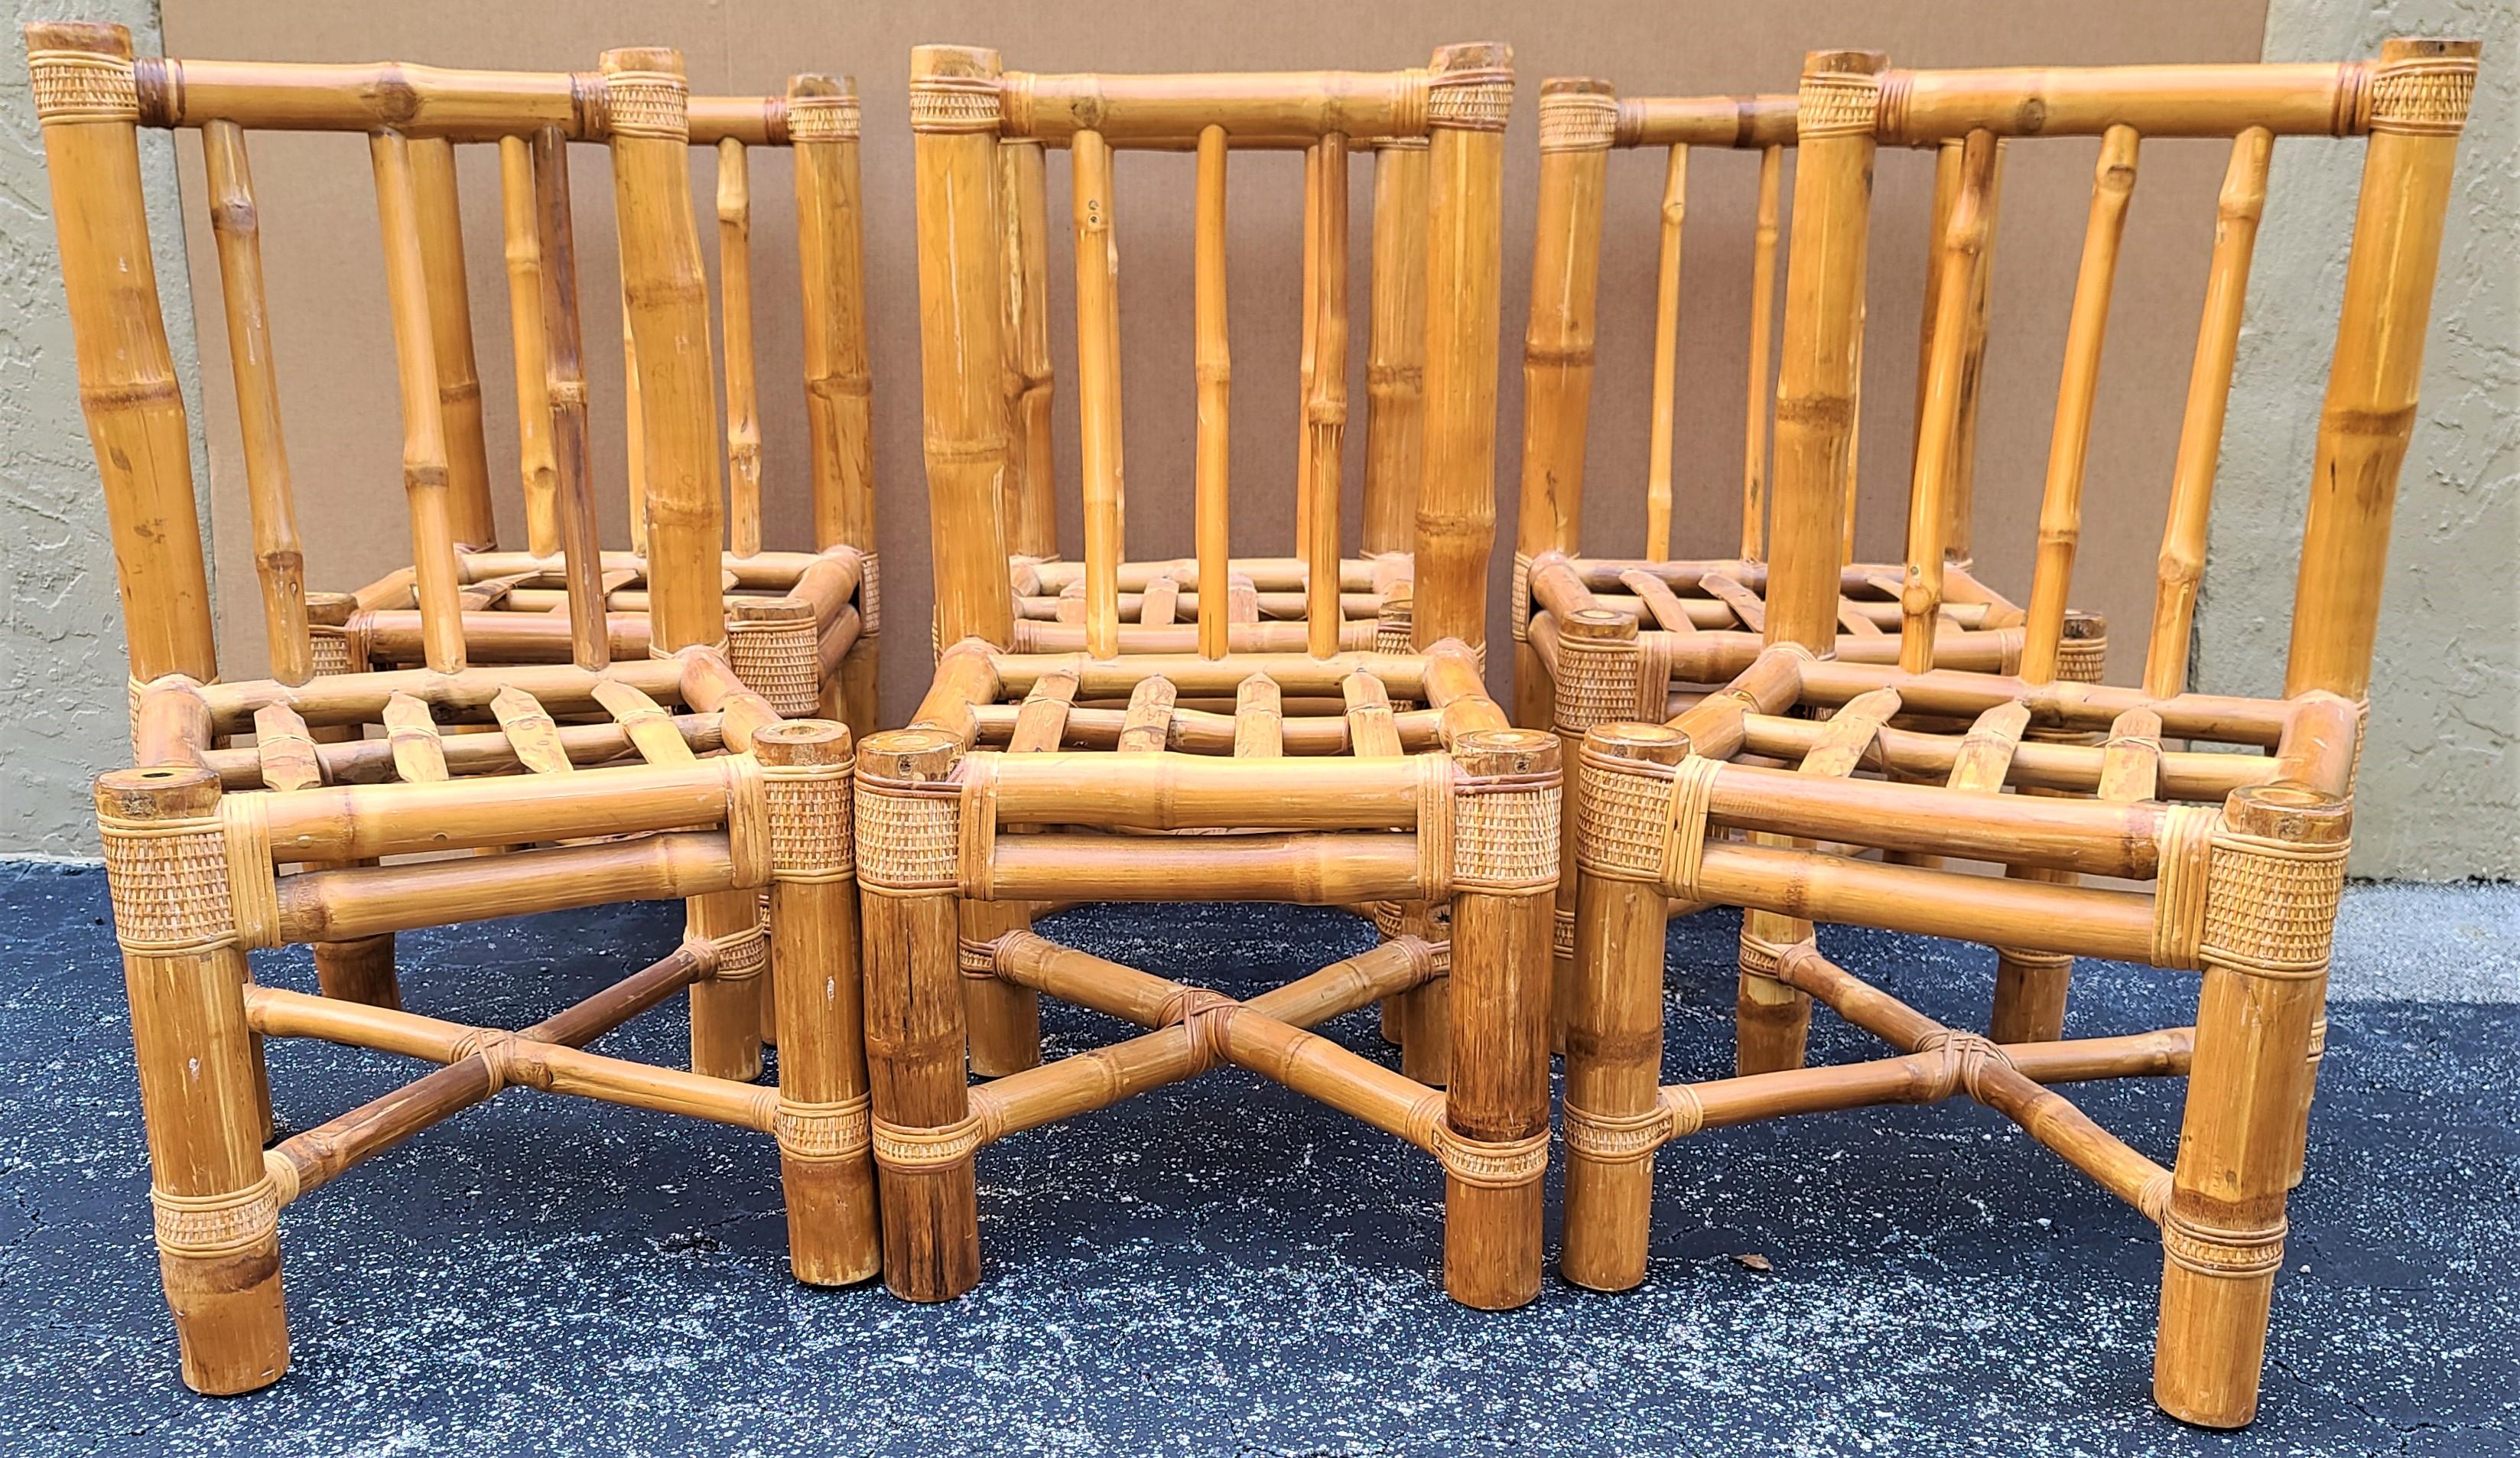 Offering one of our recent Palm Beach Estate fine furniture acquisitions of a
Set of (6) vintage elephant bamboo rattan wicker dining chairs with cushions by HEINSA
The 100% cotton cushion covers have zippers so they are washable.

Approximate